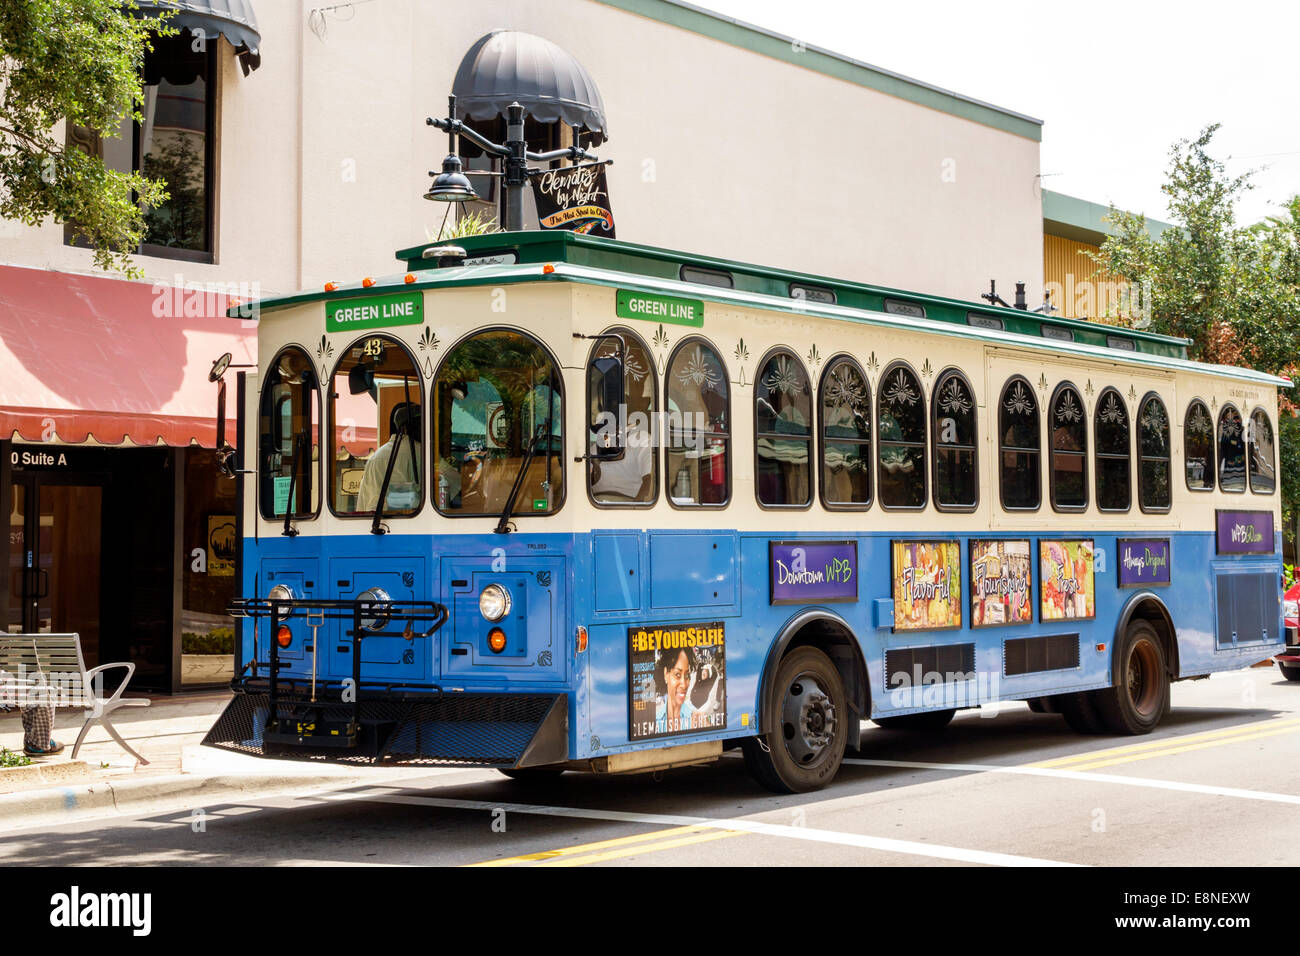 West Palm Beach Florida,Clematis Street,WPB Downtown Trolley,Green Line,FL140524030 Banque D'Images